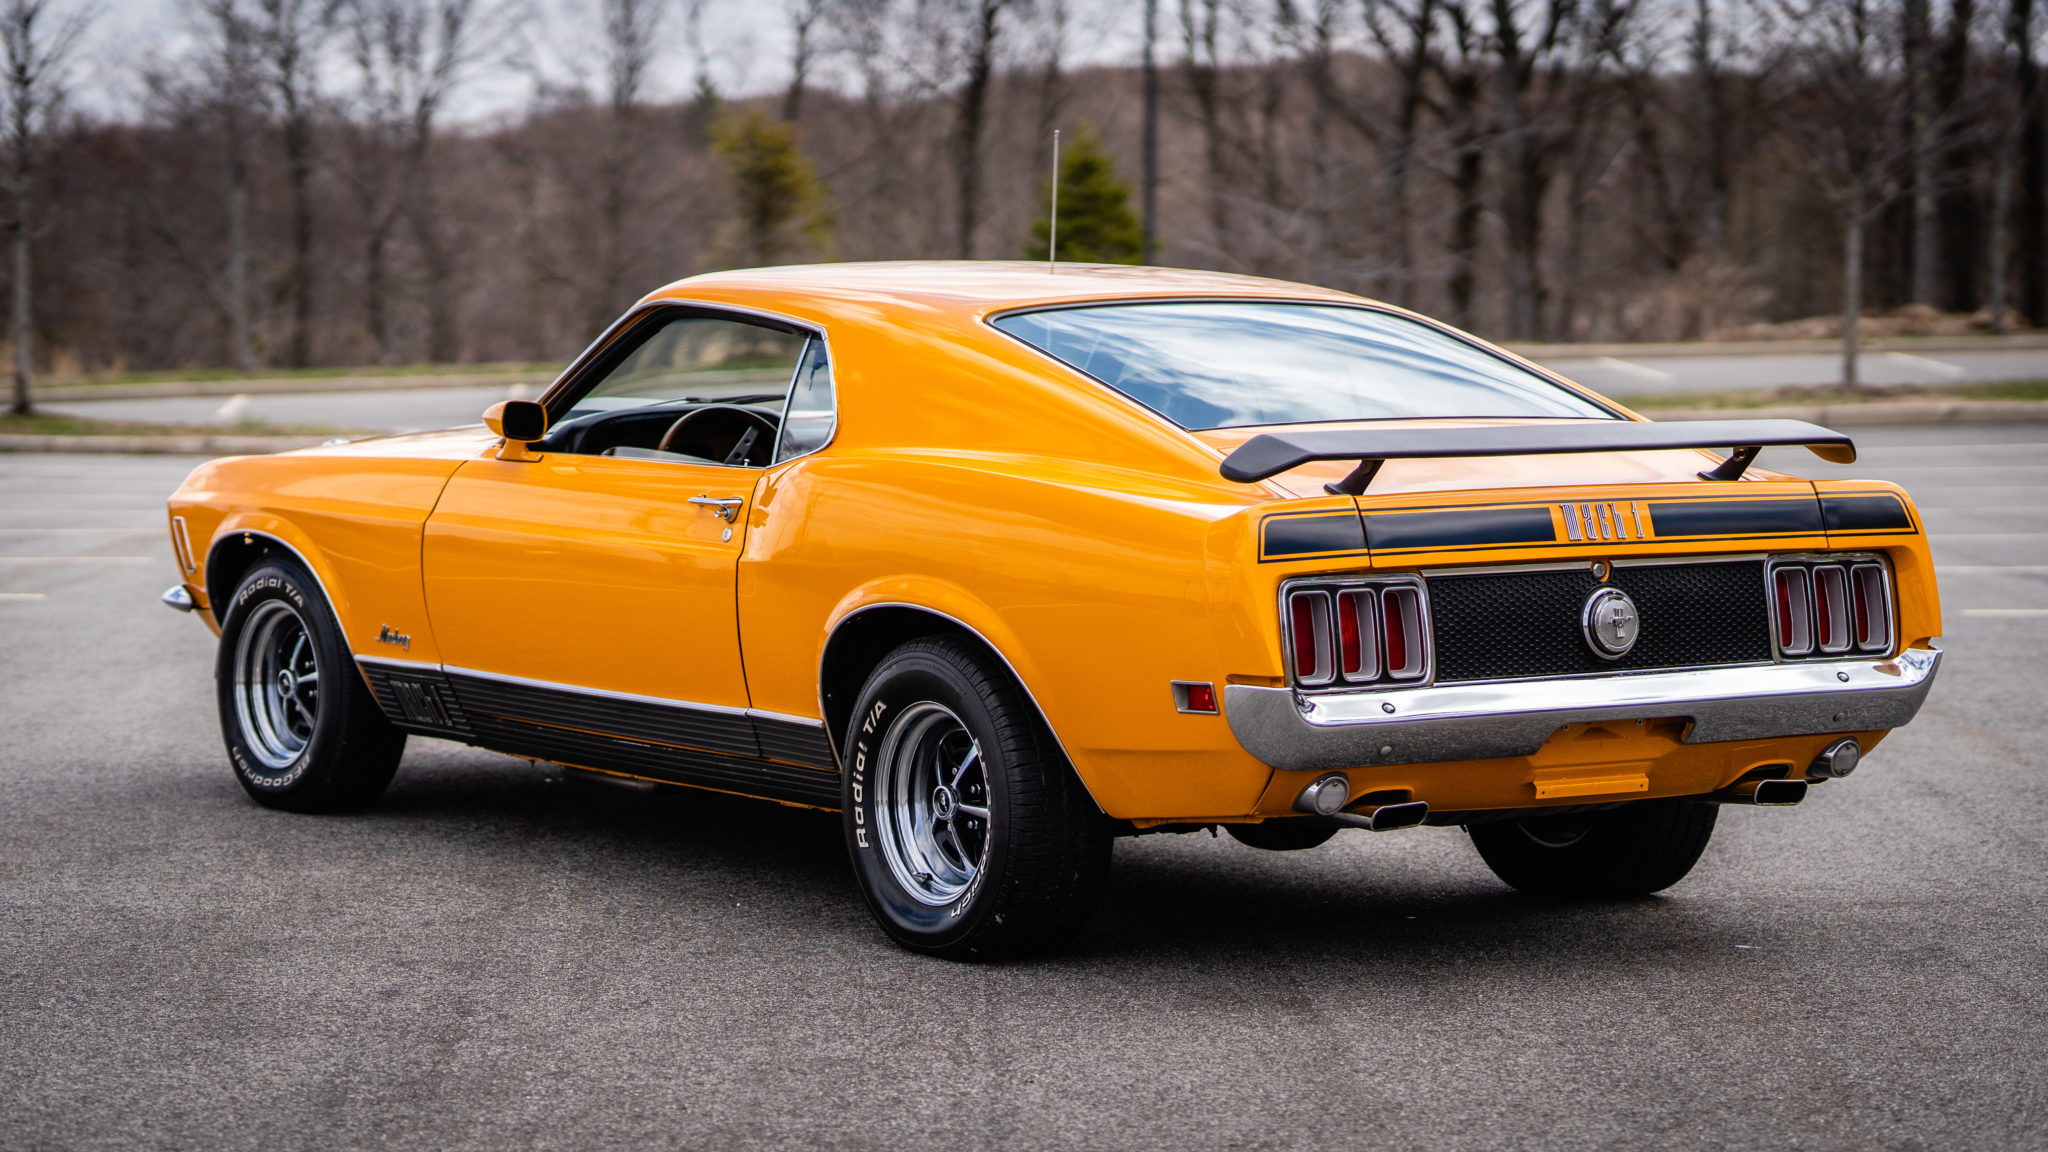 1970 Ford Mustang Mach 1 makes timely auction debut - Autoblog